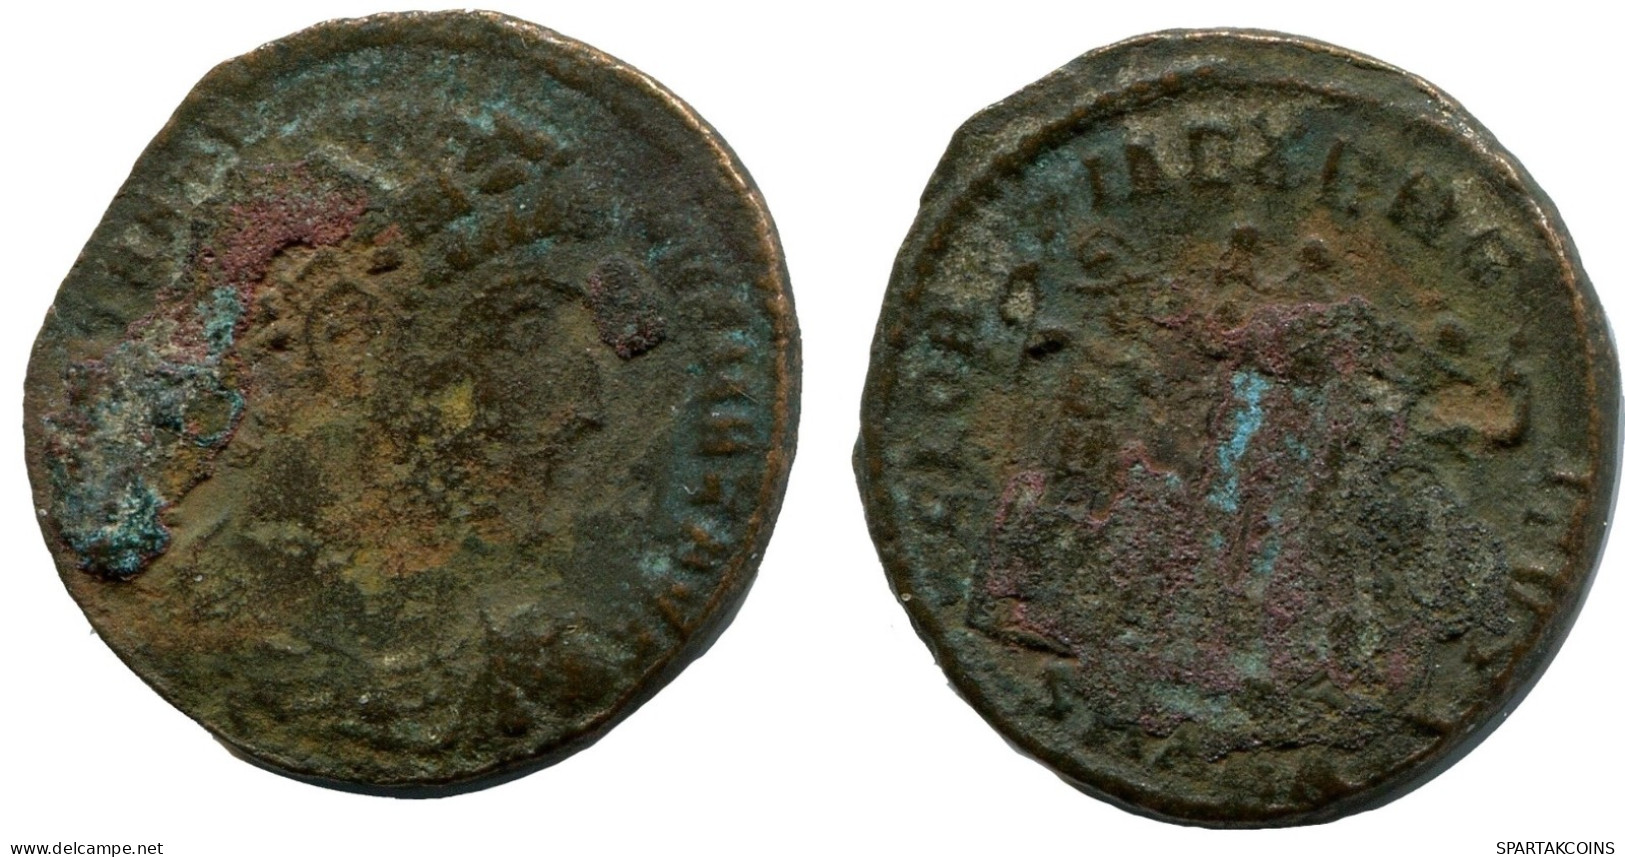 CONSTANTINE I MINTED IN ANTIOCH FOUND IN IHNASYAH HOARD EGYPT #ANC10631.14.E.A - El Imperio Christiano (307 / 363)